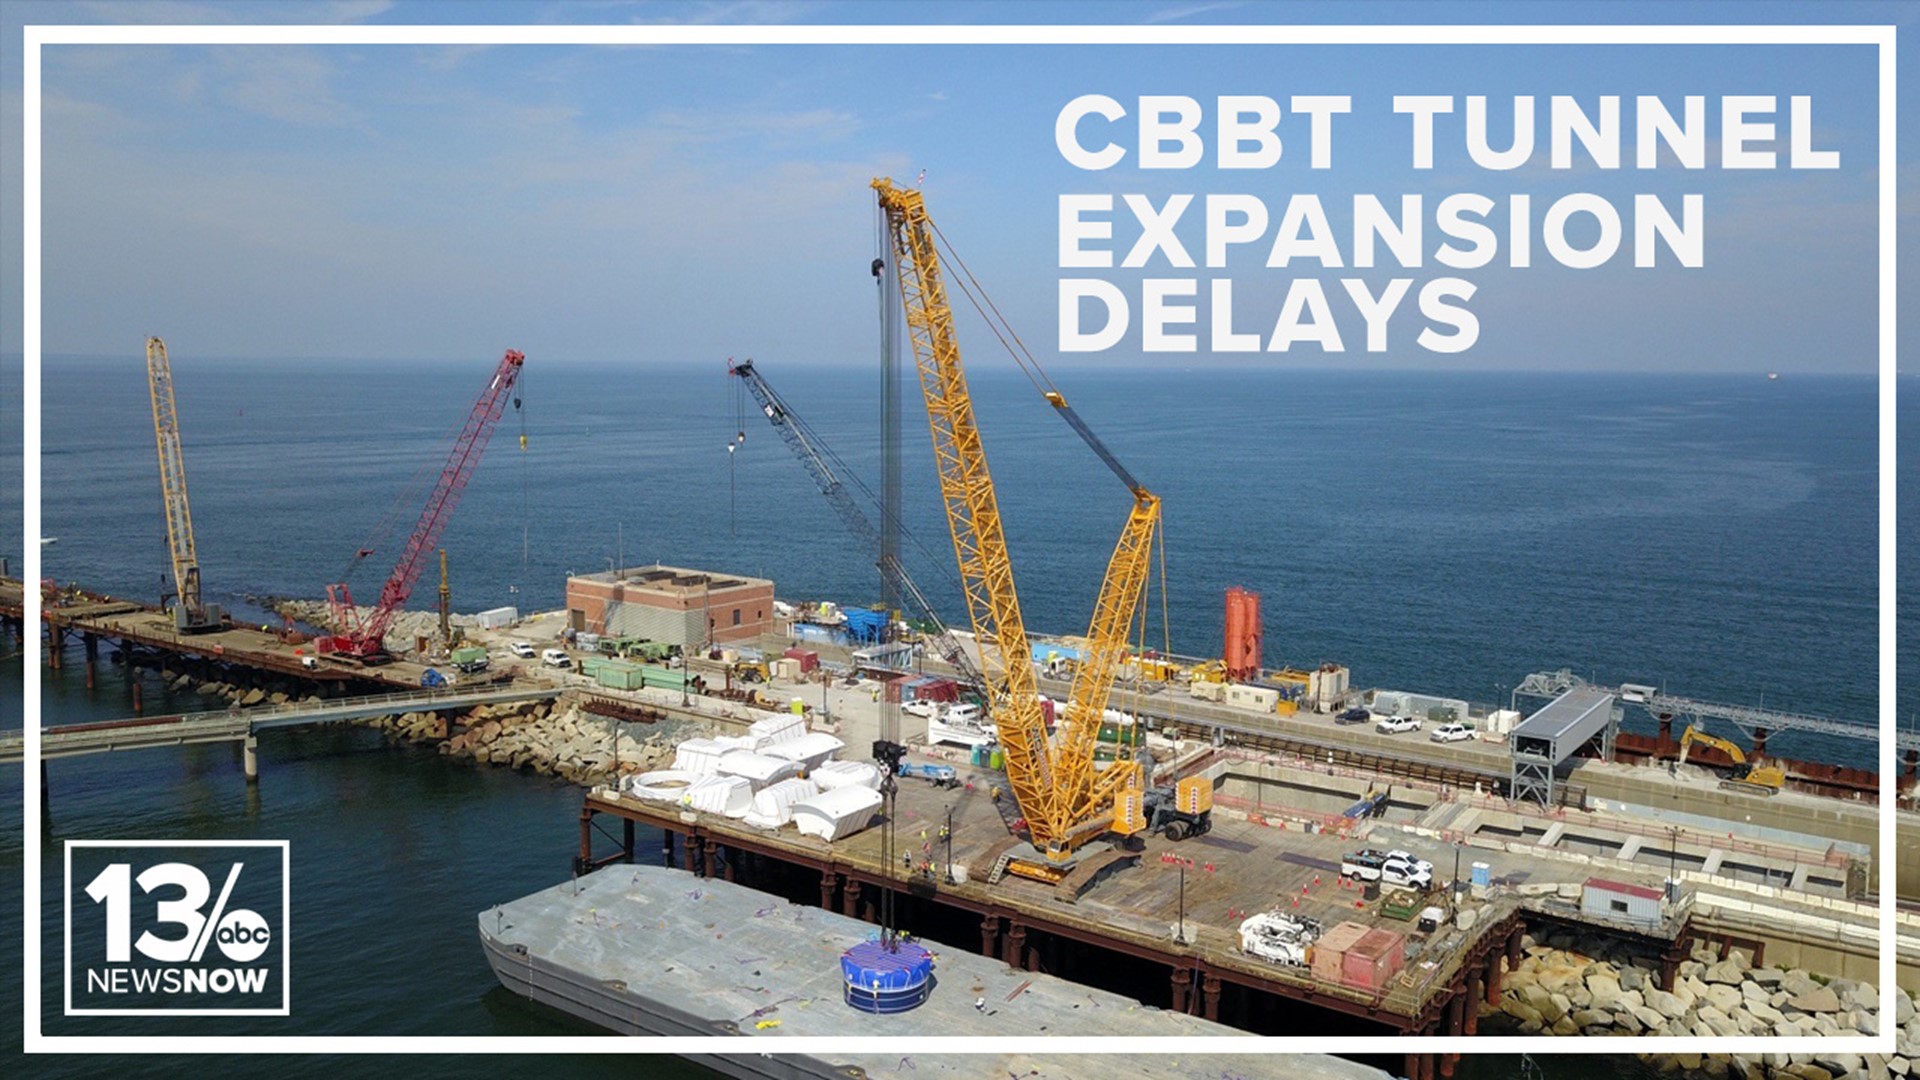 The CBBT's new parallel tunnel at Thimble Shoals won't be ready until January of 2027. Work on the project began in 2017.